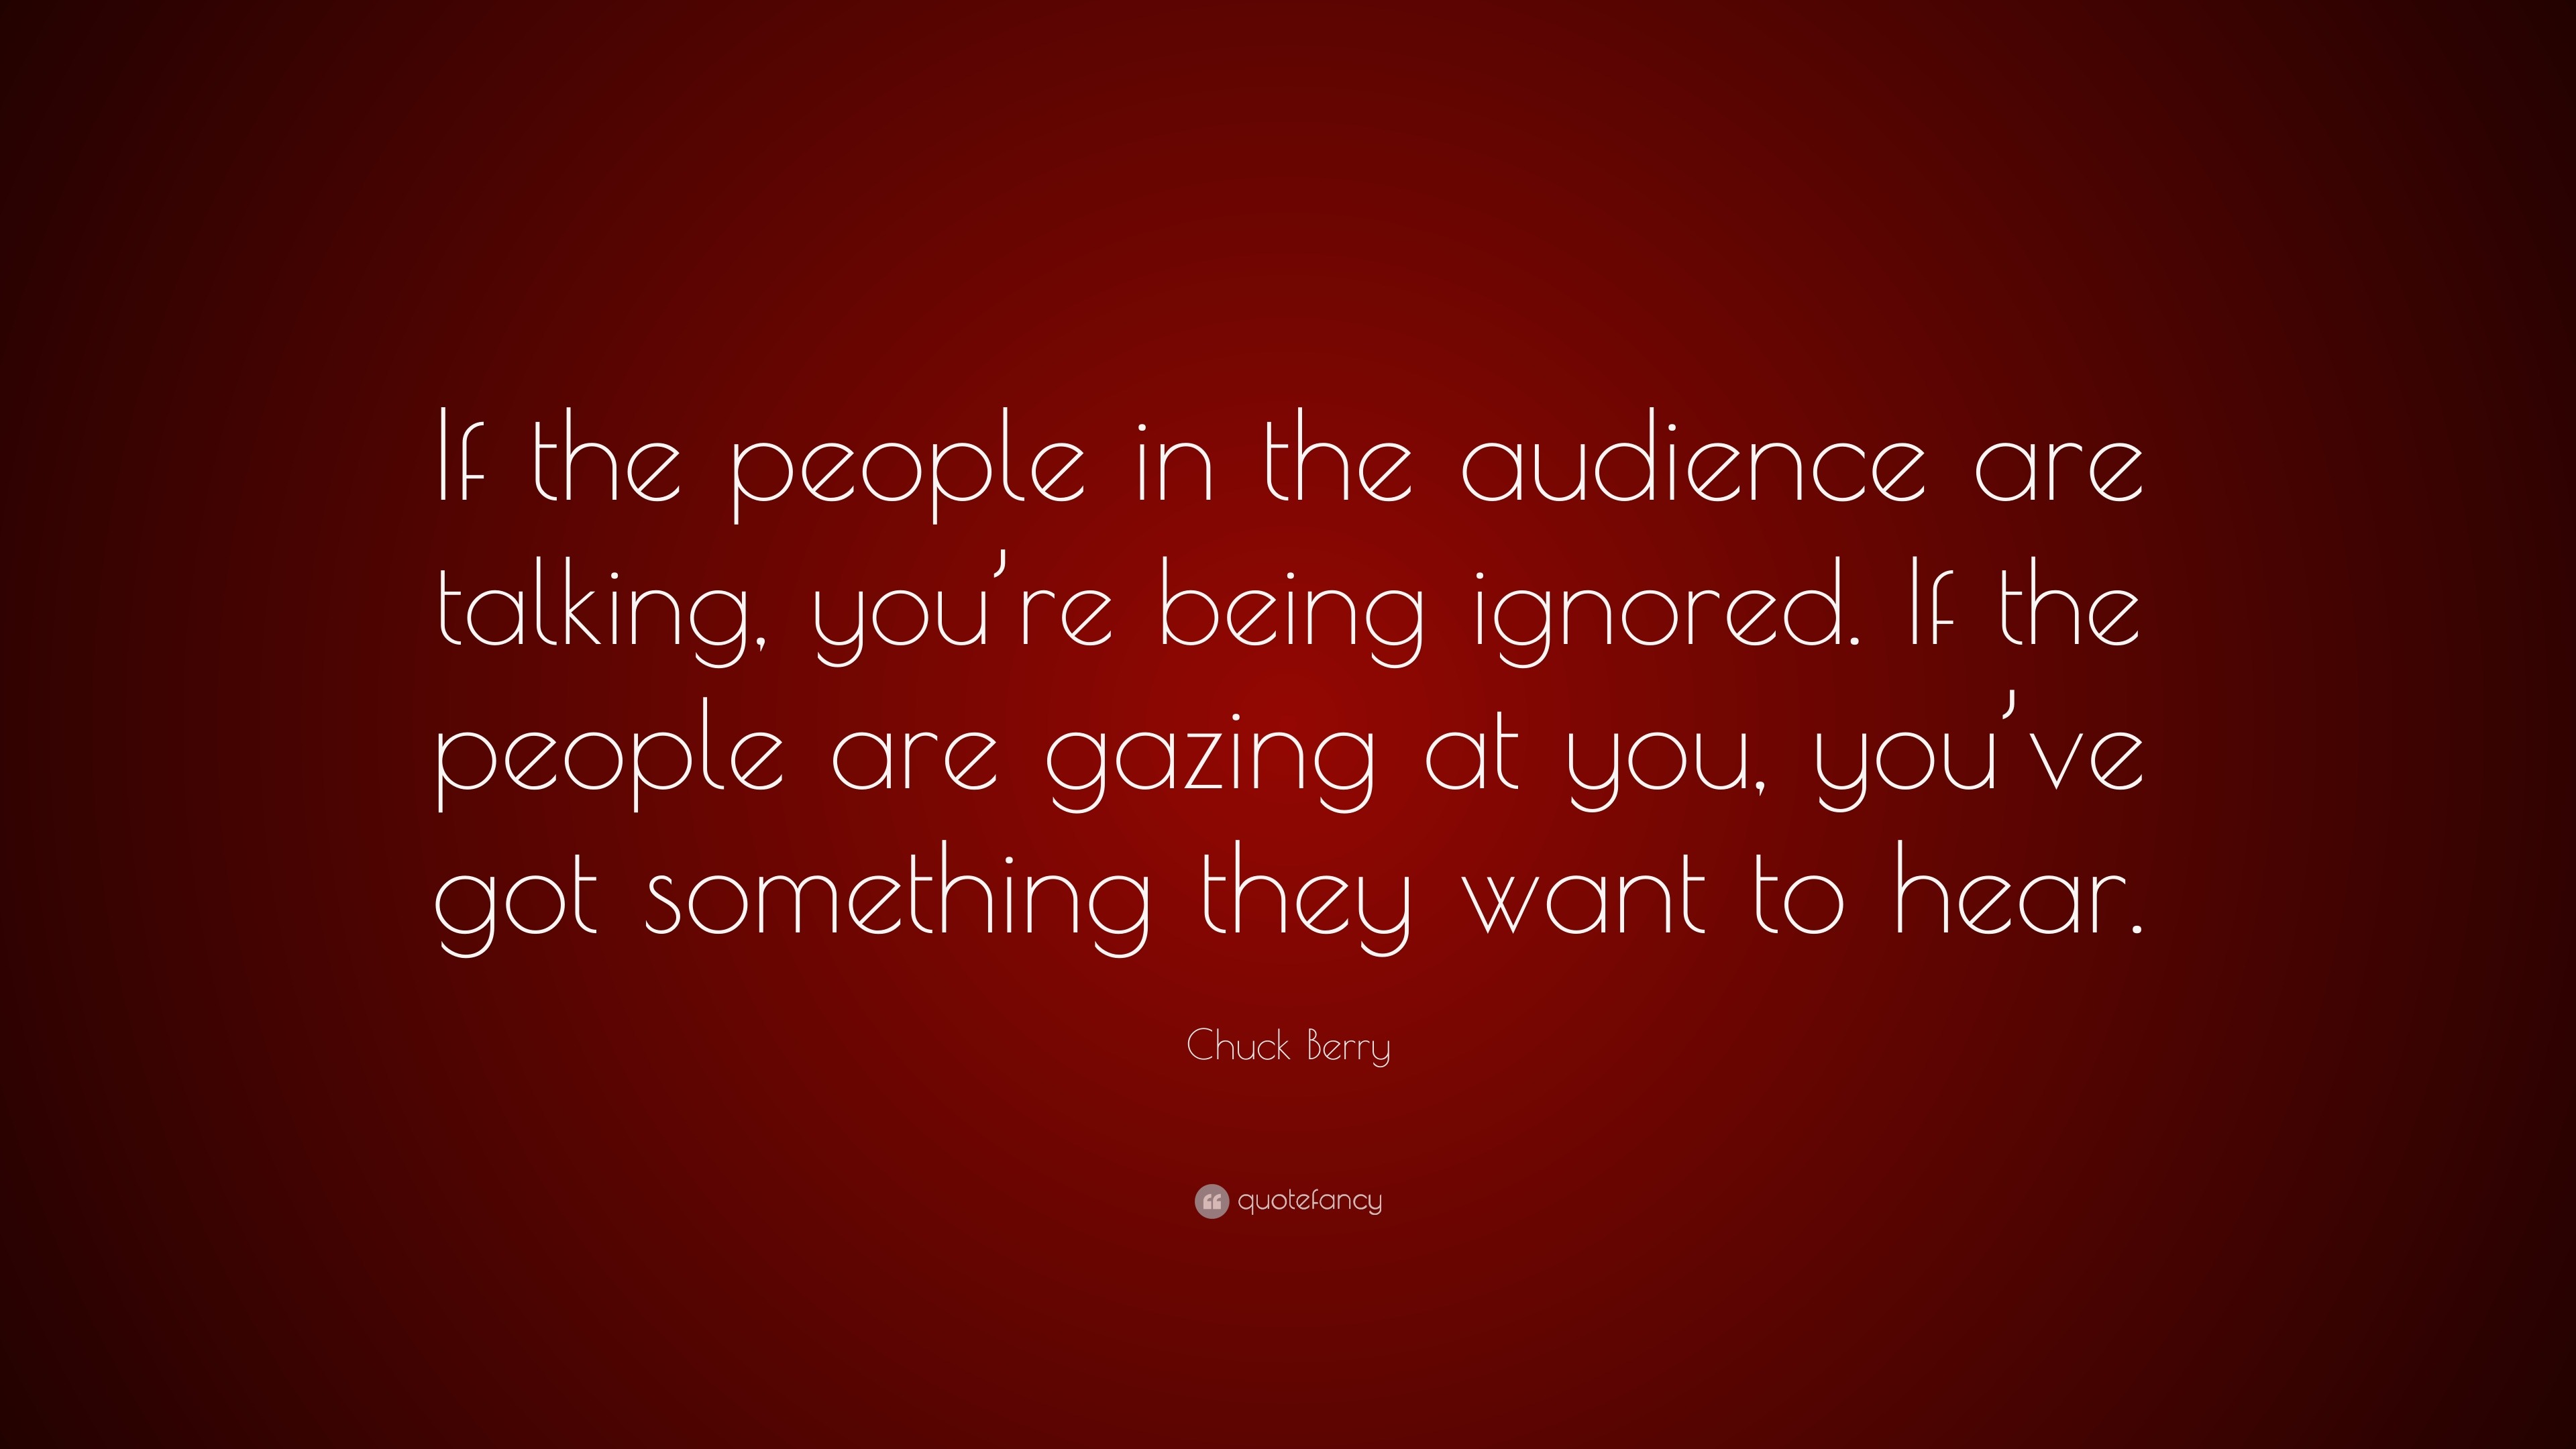 Chuck Berry Quote: “If the people in the audience are talking, you’re ...